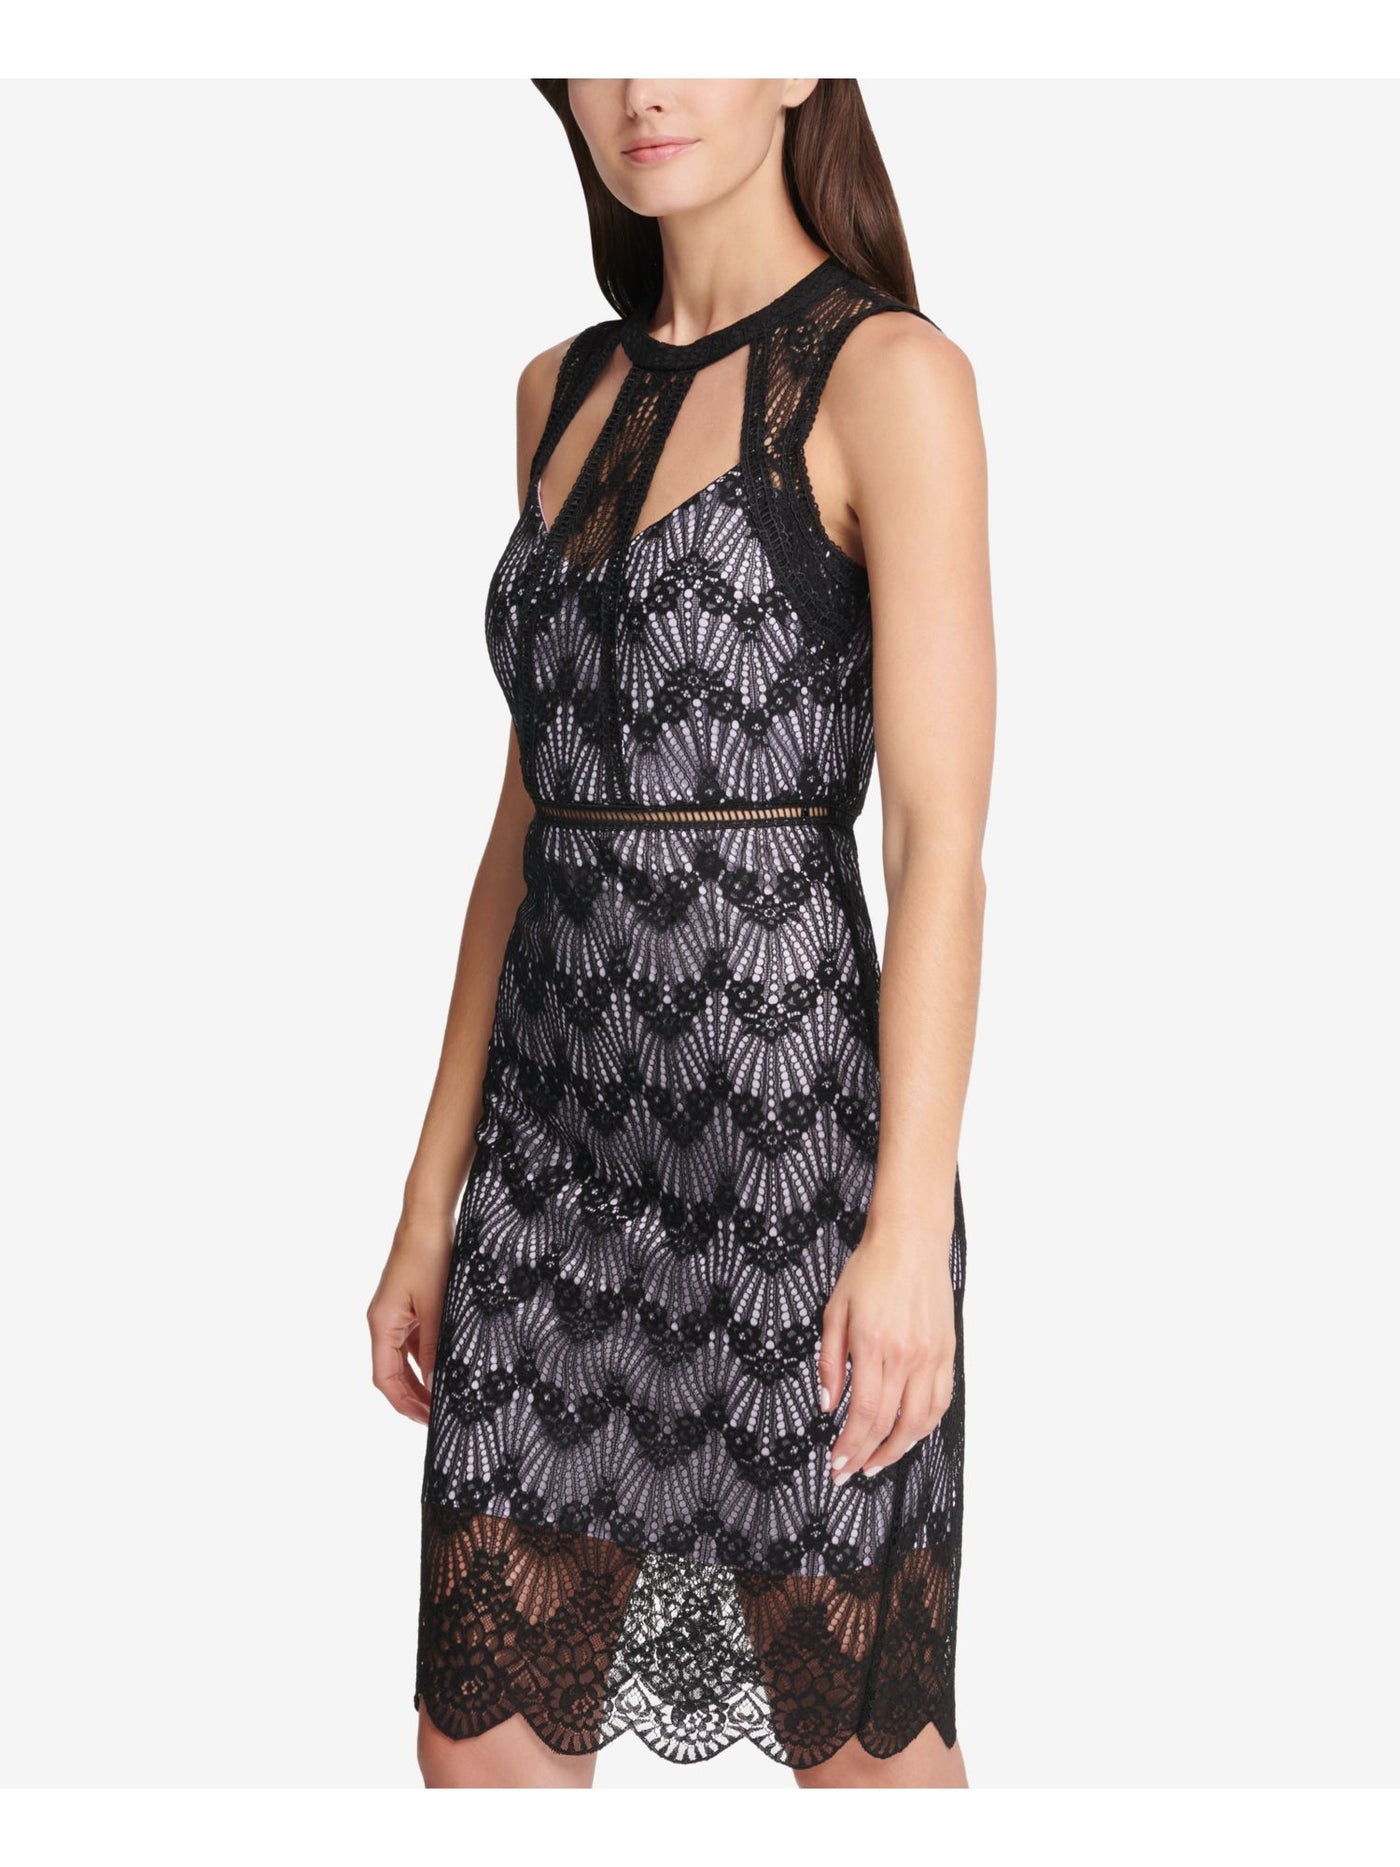 GUESS Womens Black Lace Cut Out Sleeveless Halter Below The Knee Cocktail Sheath Dress 0